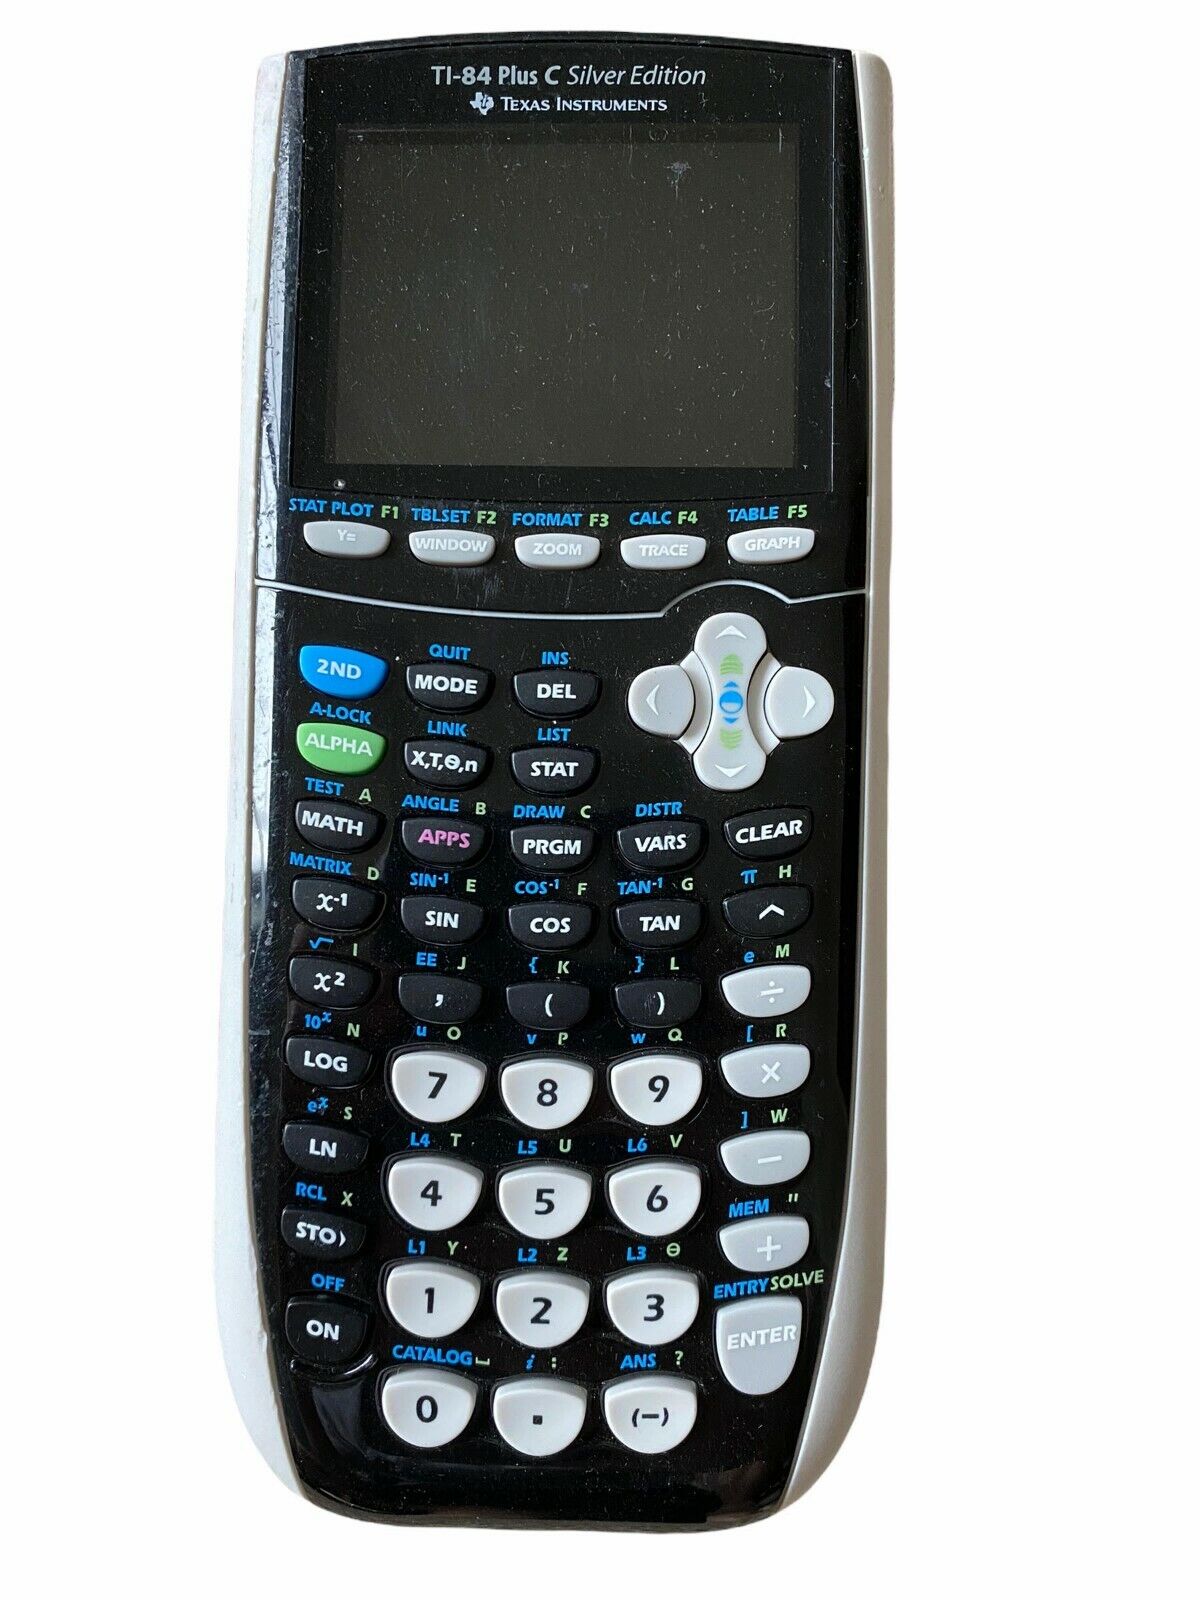 Texas Instruments TI-84 Plus C Silver Edition Graphing Calculator Black Scratch